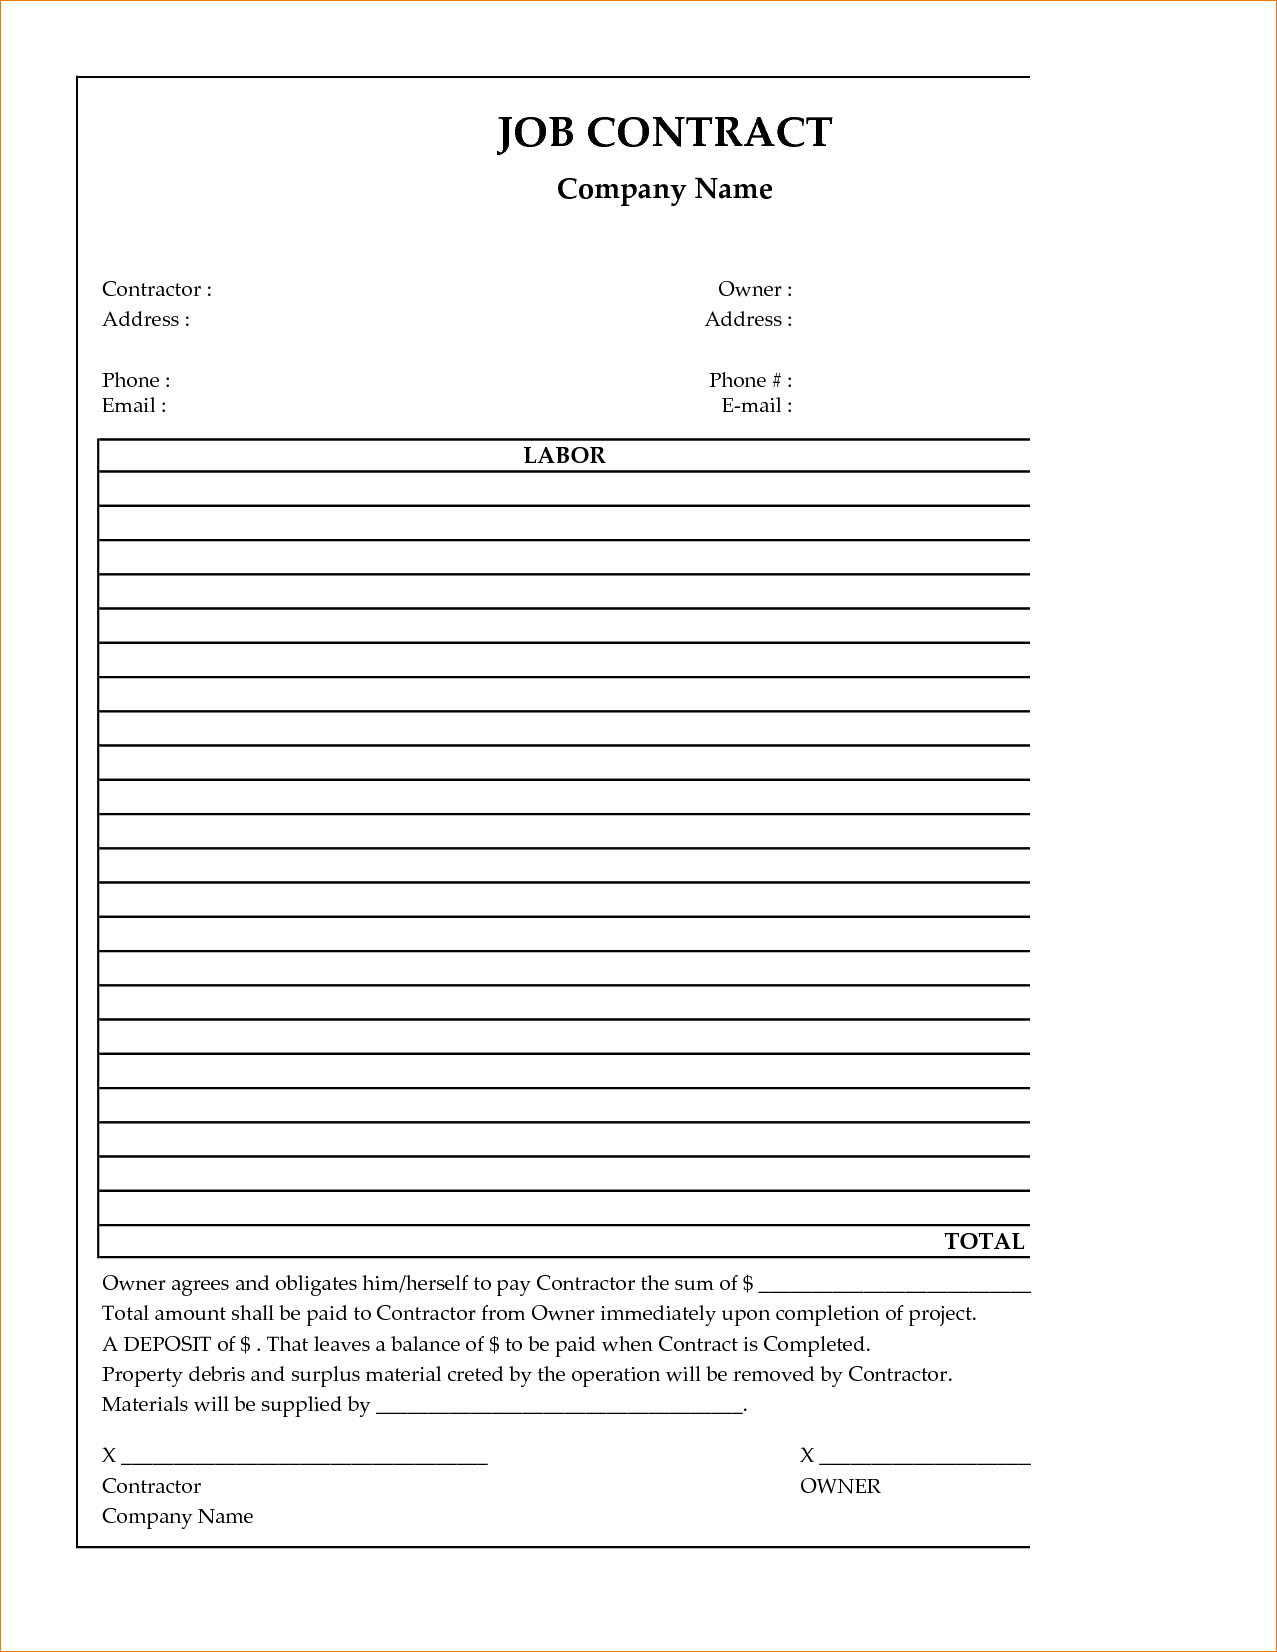 Template: Free Printable Construction Contract Template - Free Printable Construction Contracts